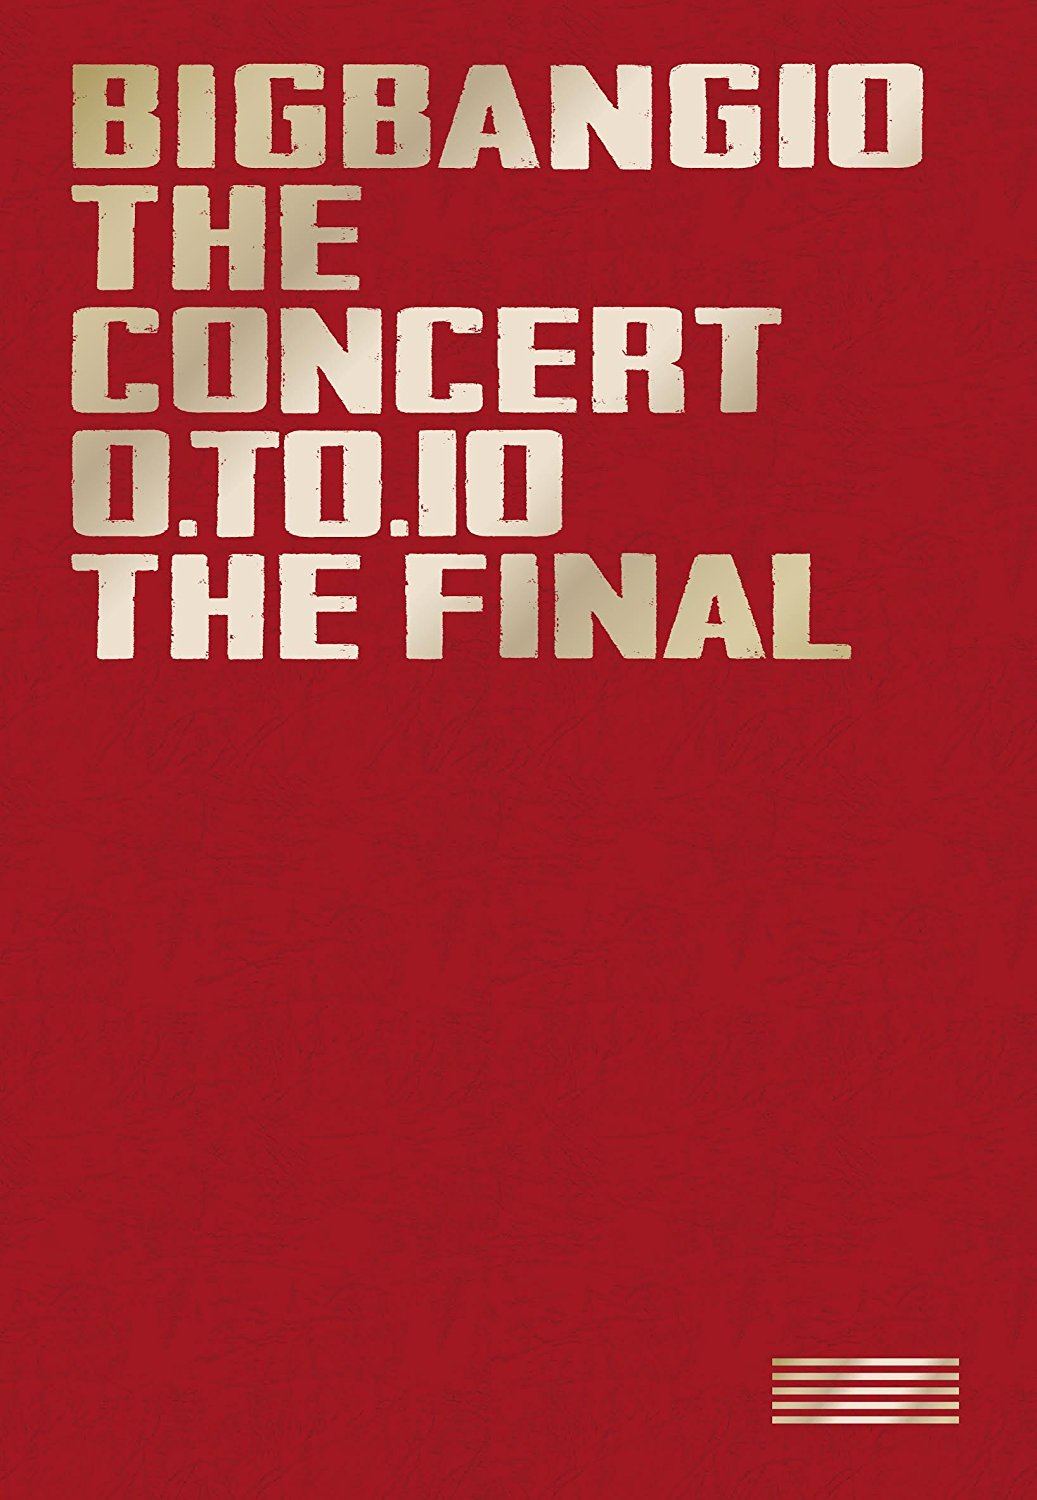 Bigbang10 The Concert: 0 To 10 - The Final - Deluxe Edition [3Blu-ray+2CD  Limited Edition]